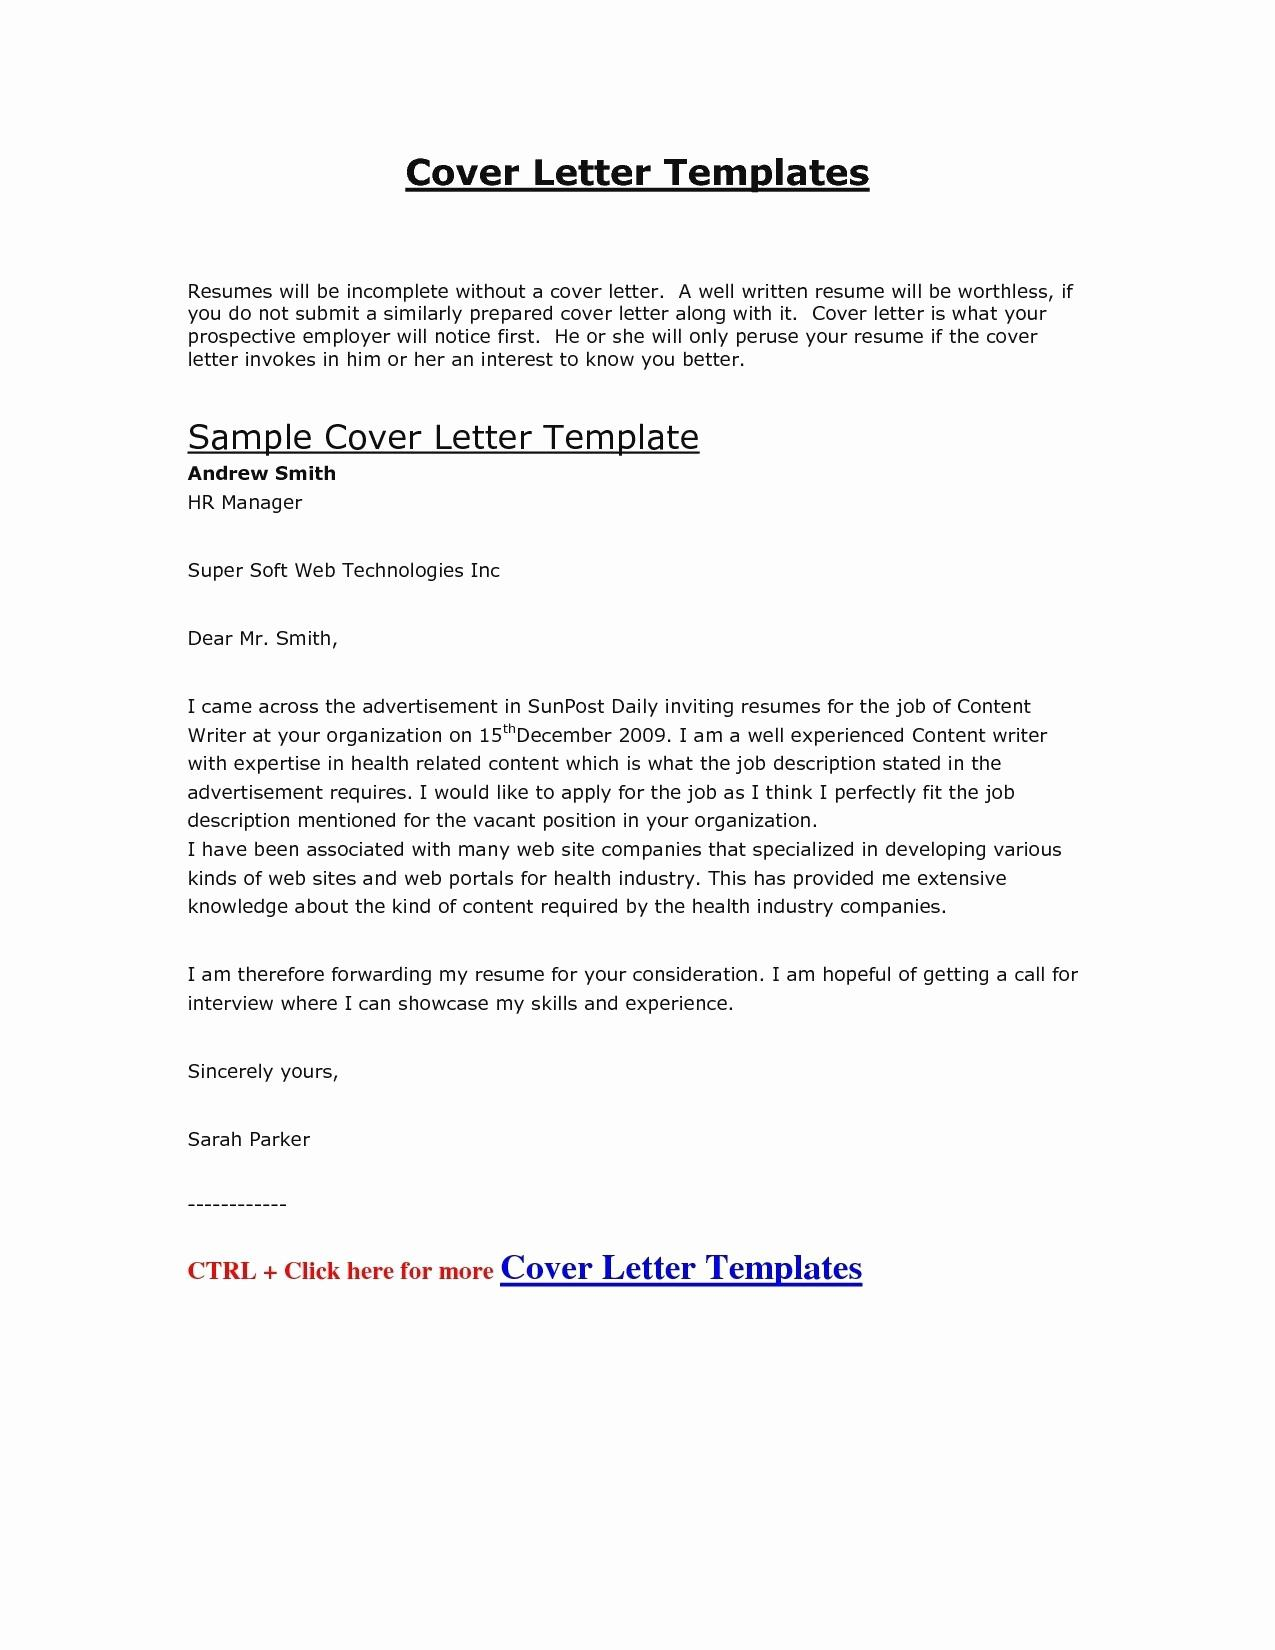 Application Letter Template - Resume Templates Poppycockreviews